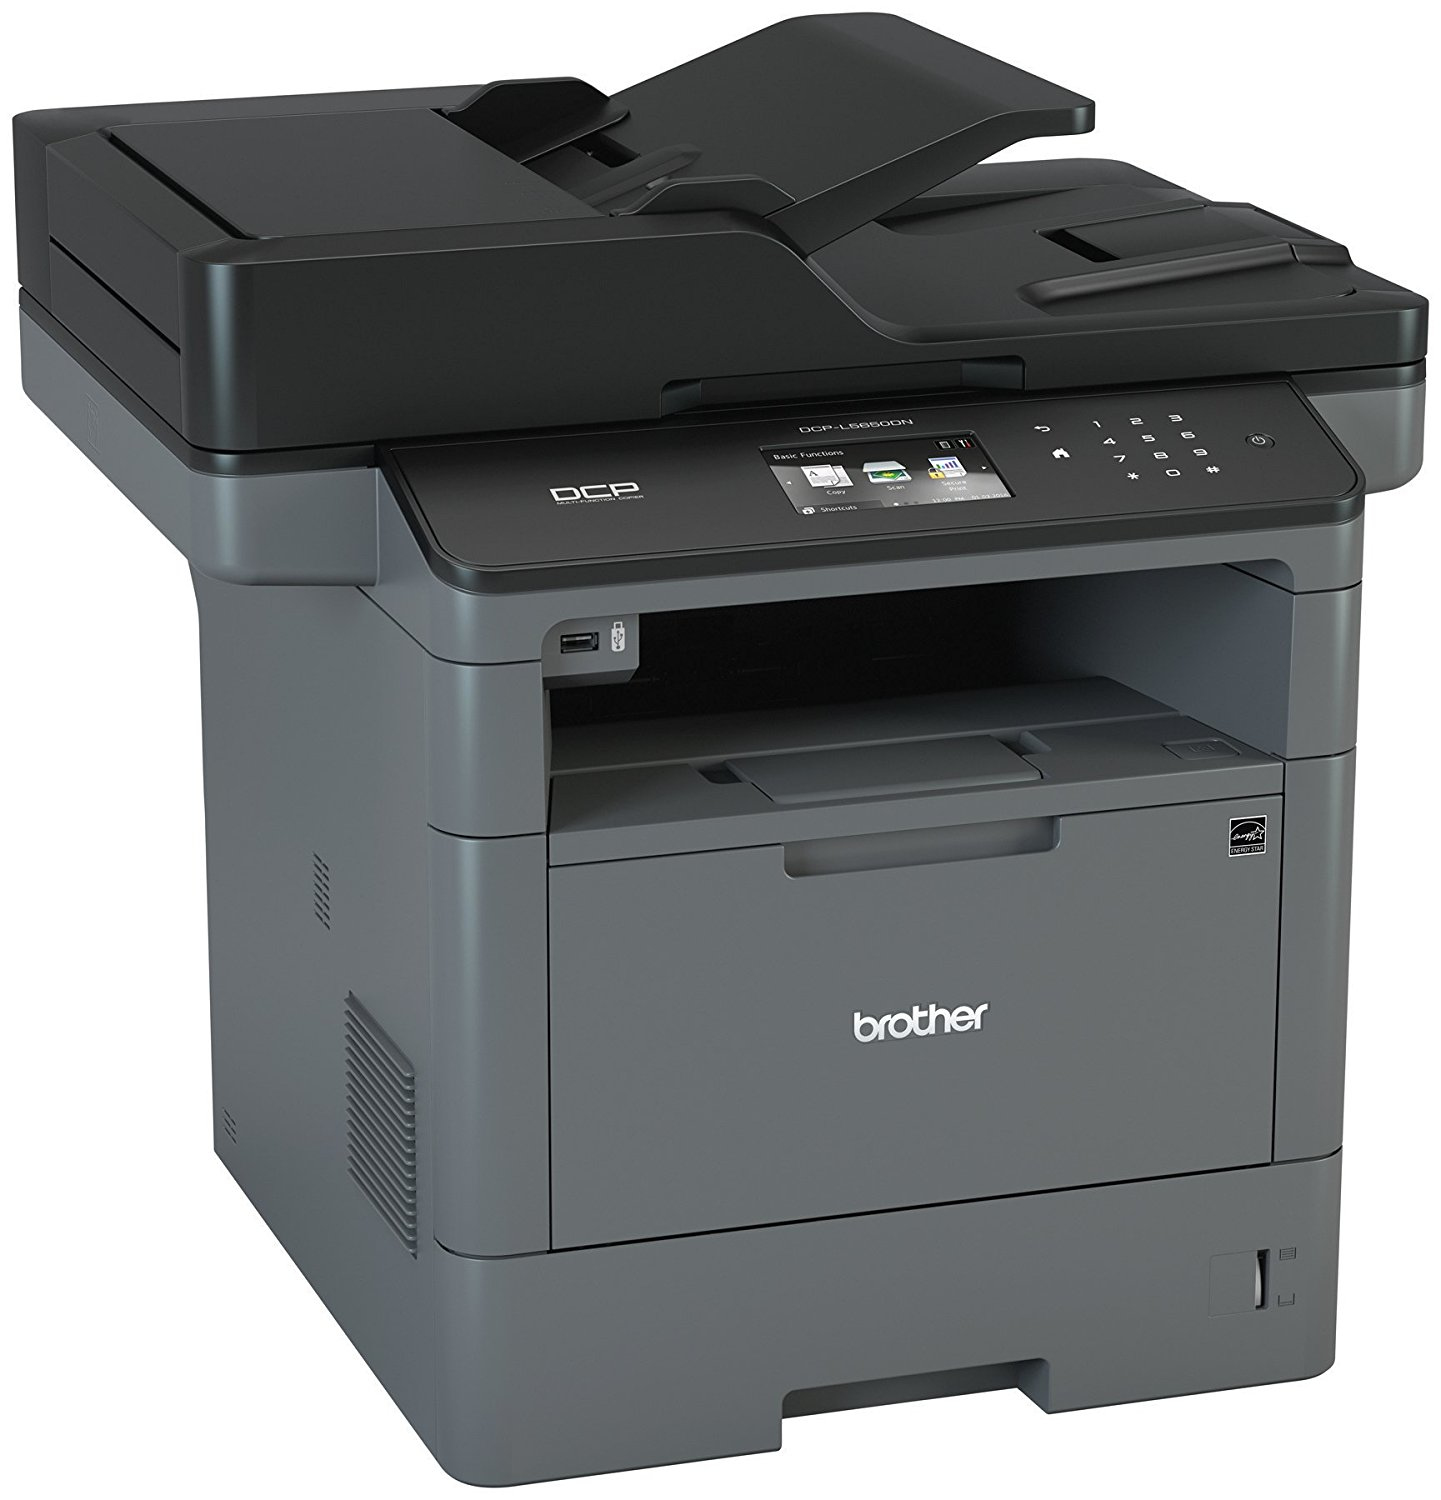 Brother DCP-L5650DN - Multifunction printer - B/W - laser - Legal (8.5 in x 14 in) (original) - A4/Legal (media) - up to 42 ppm (printing) - 300 sheets - USB 2.0, Gigabit LAN